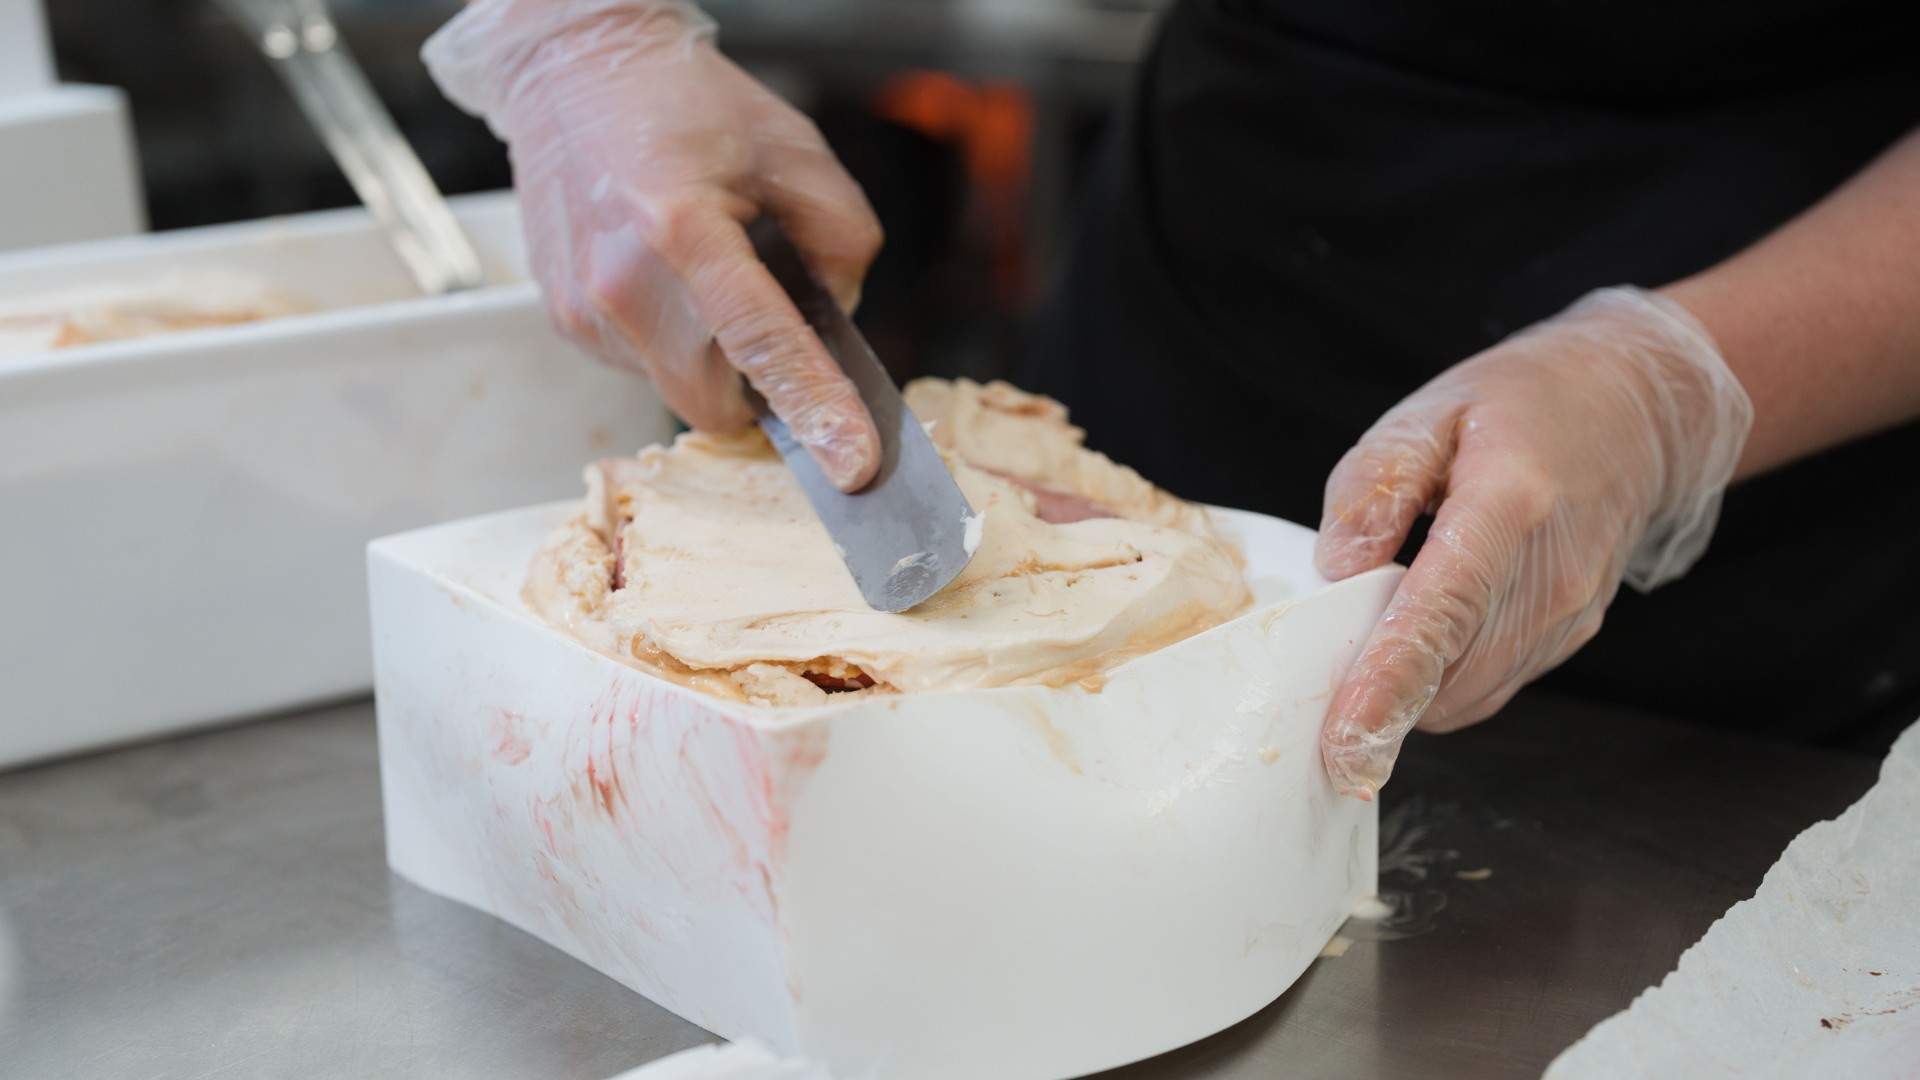 Island Gelato Co Has Created a Kumara-Infused Treat That Tackles the Fight Against Food Waste